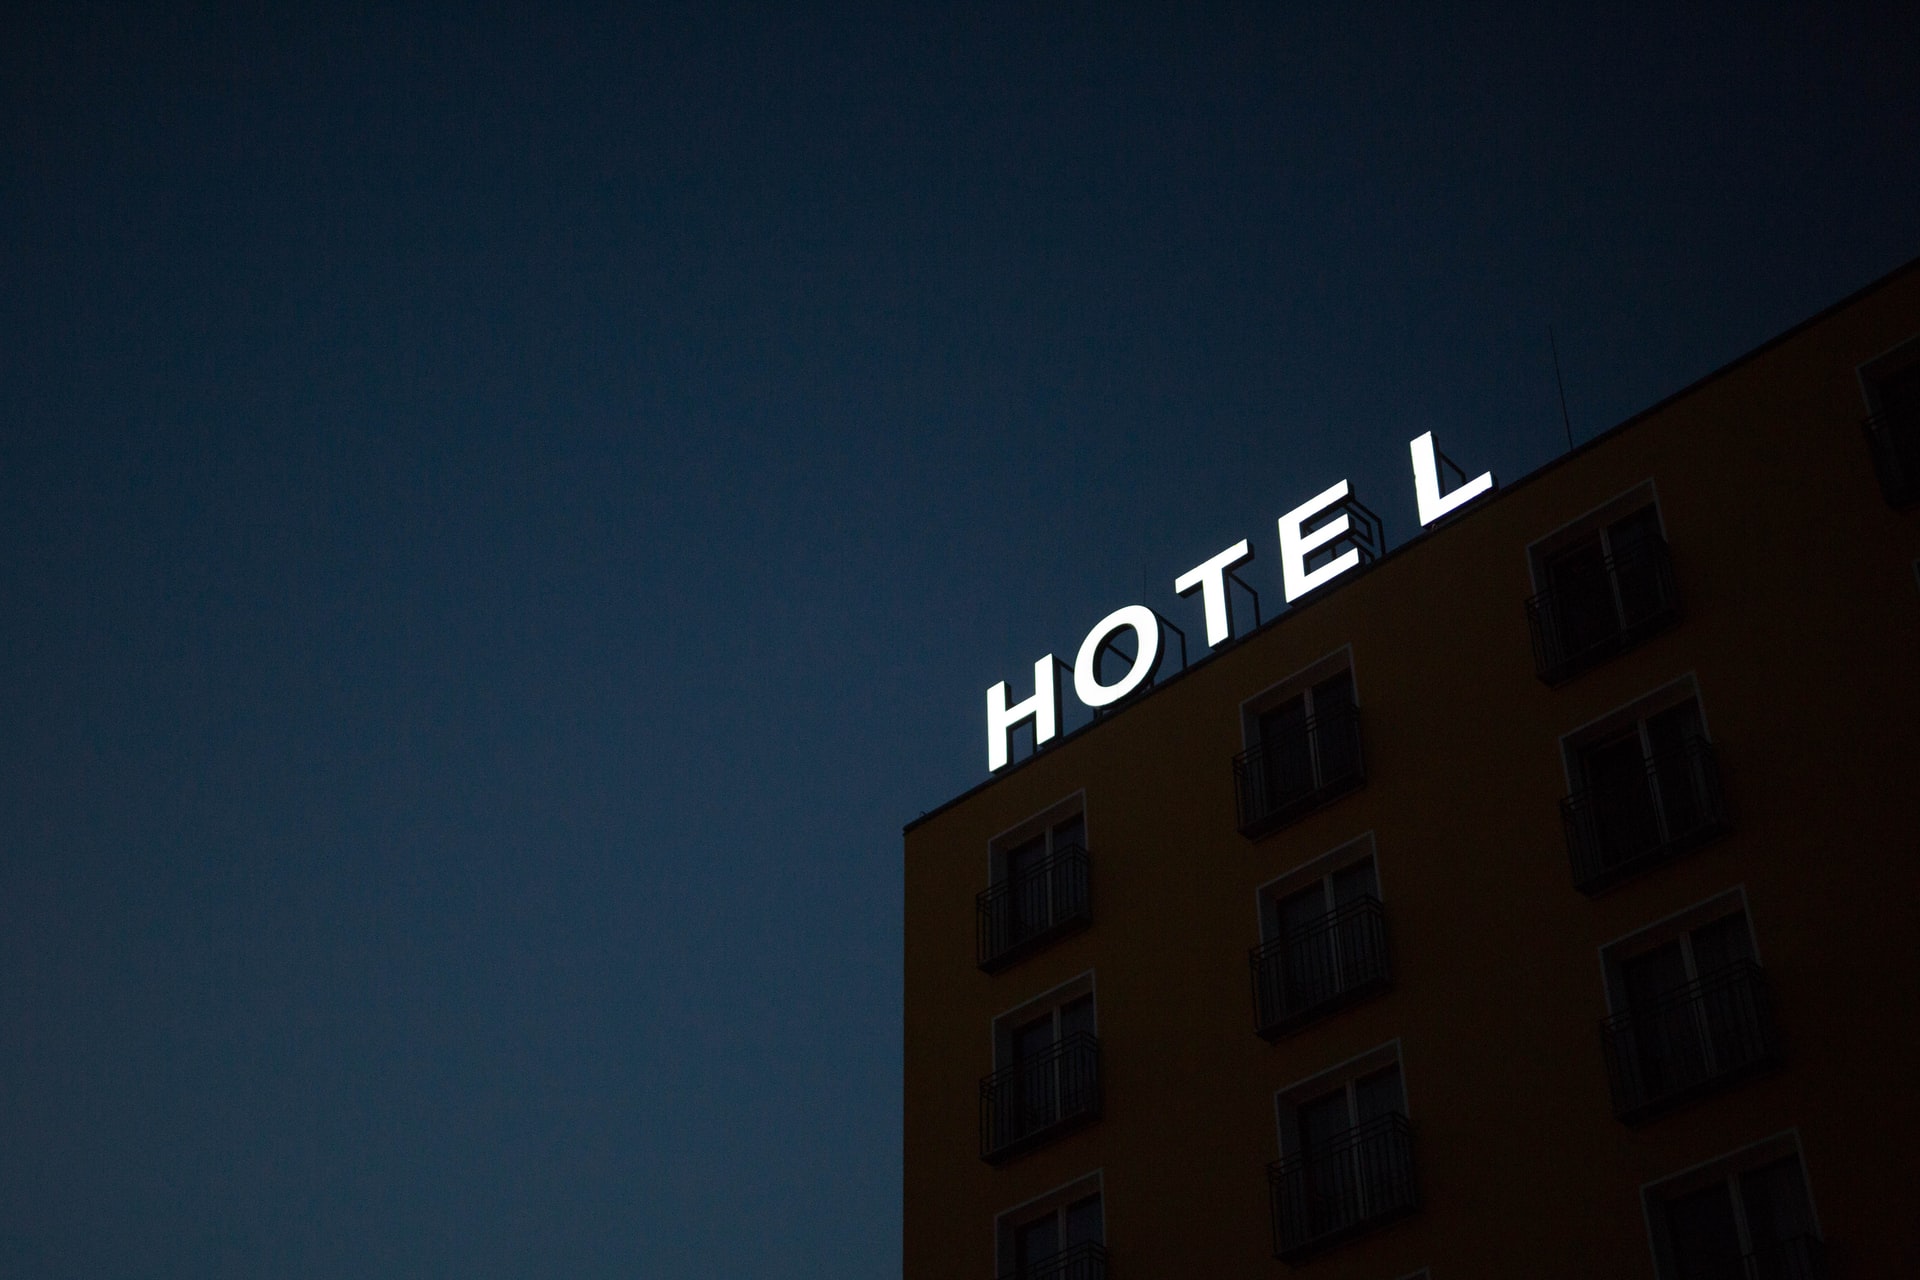 You are currently viewing Hotel Market is Among the Nation’s Most Depressed